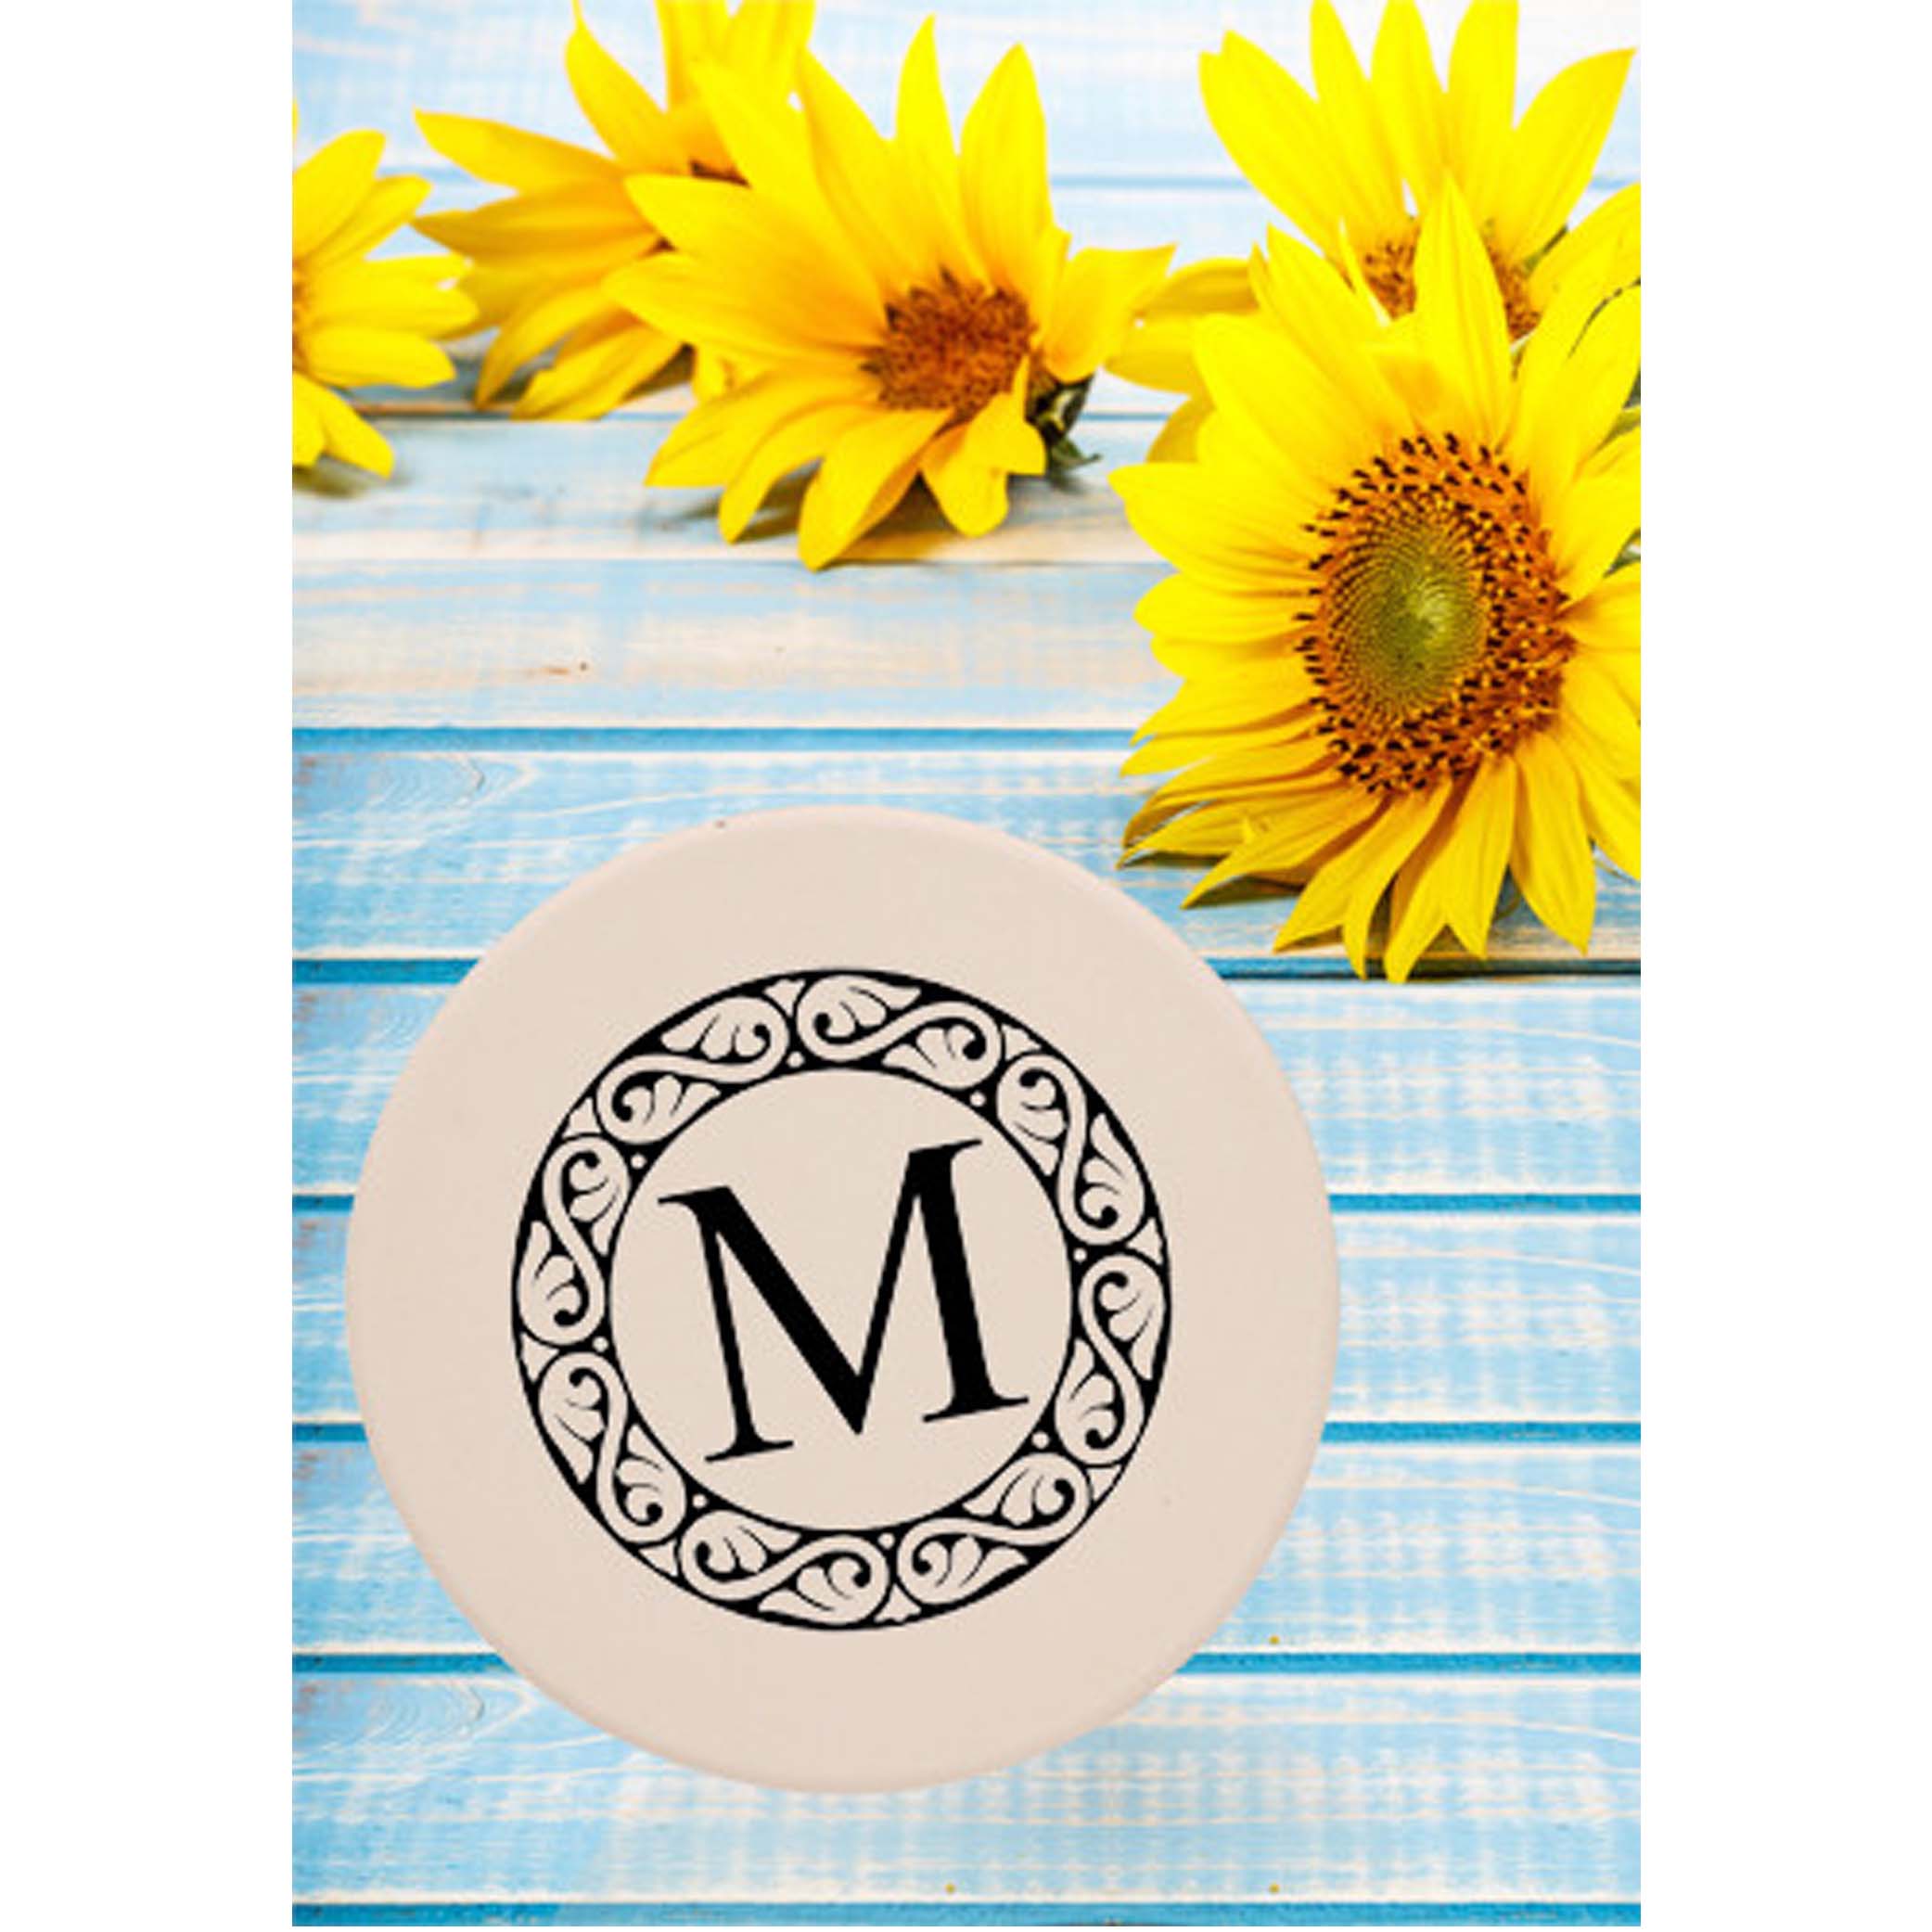 Full Color Personalized Ceramic/ Glass Coasters